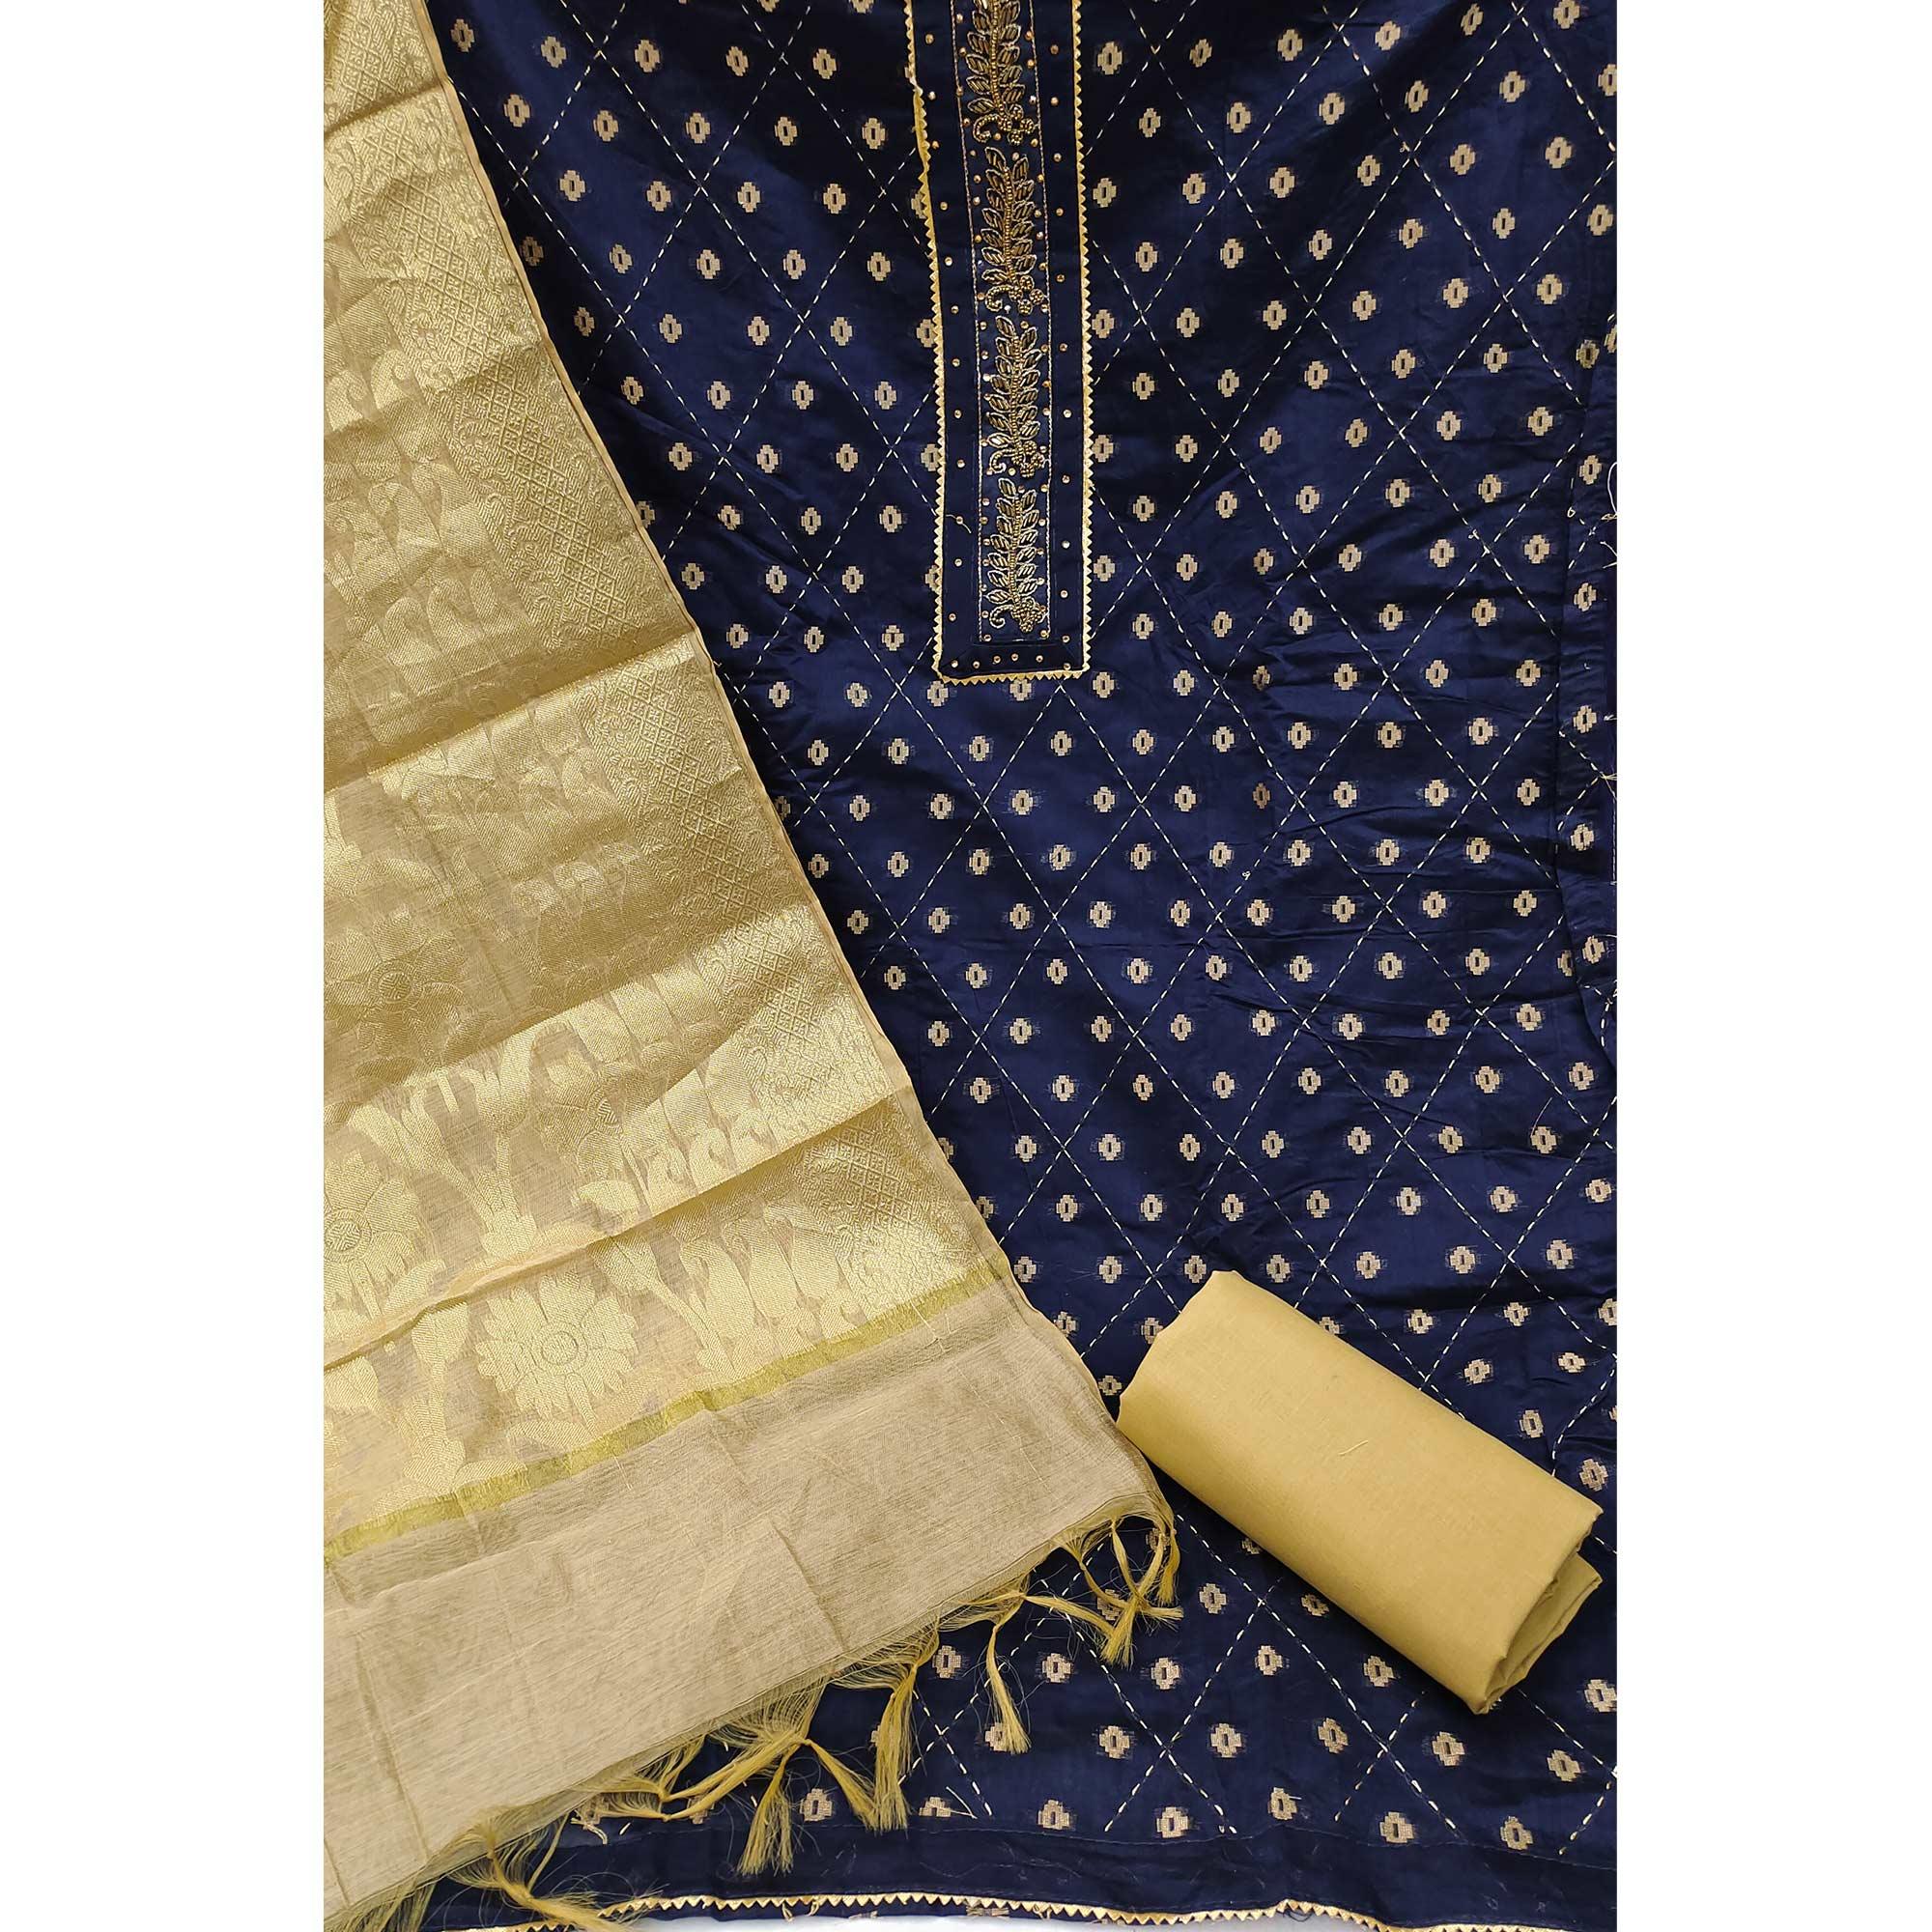 Navy Blue Festive Wear Embroidery With Embellished Chanderi Dress Material - Peachmode